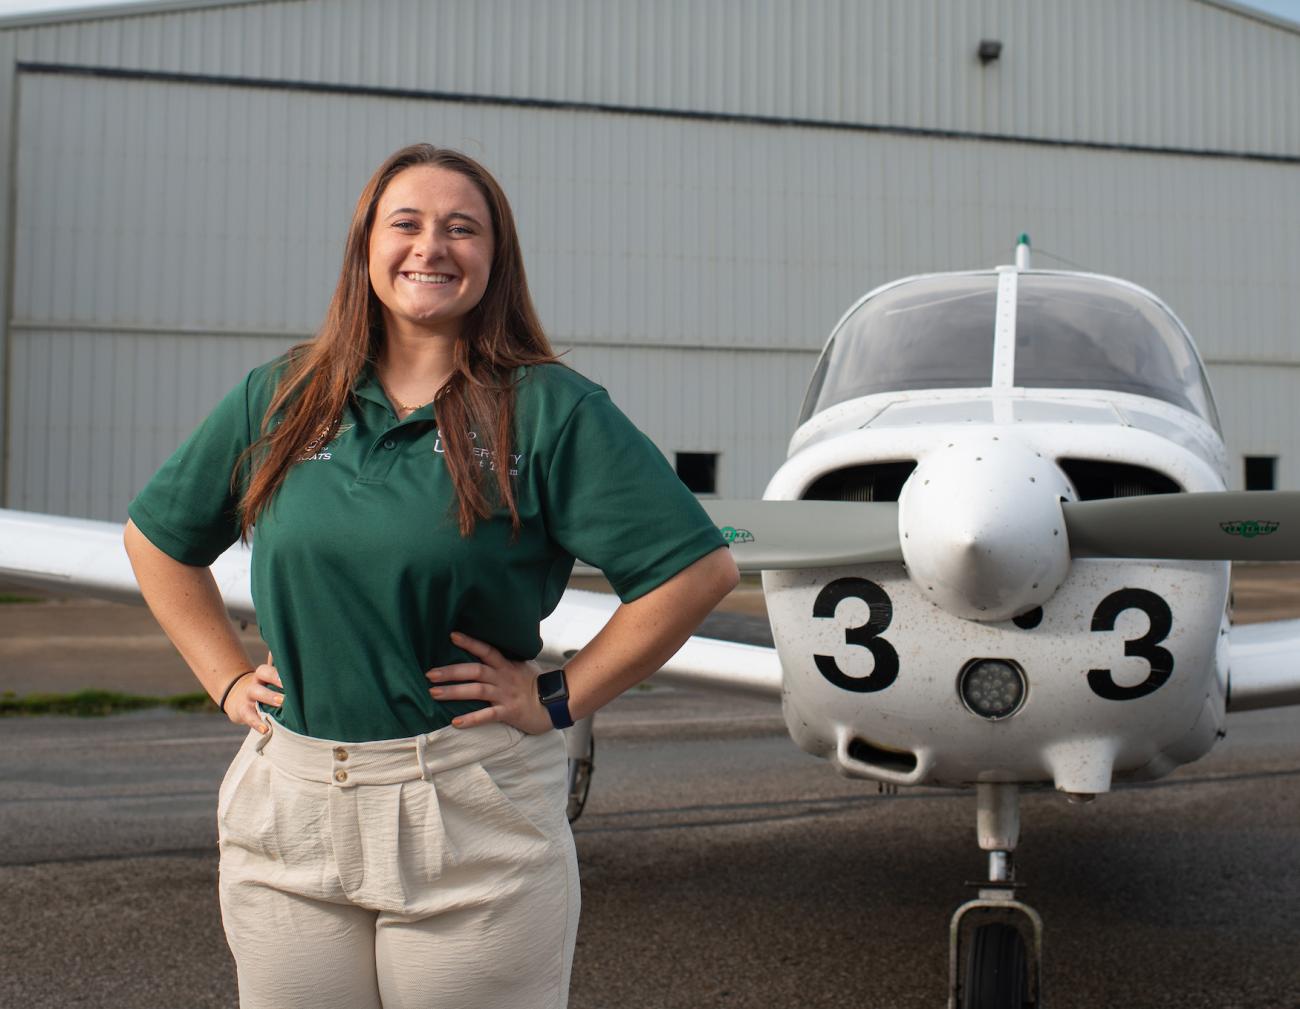 Aviation student poses with an Ohio University airplane